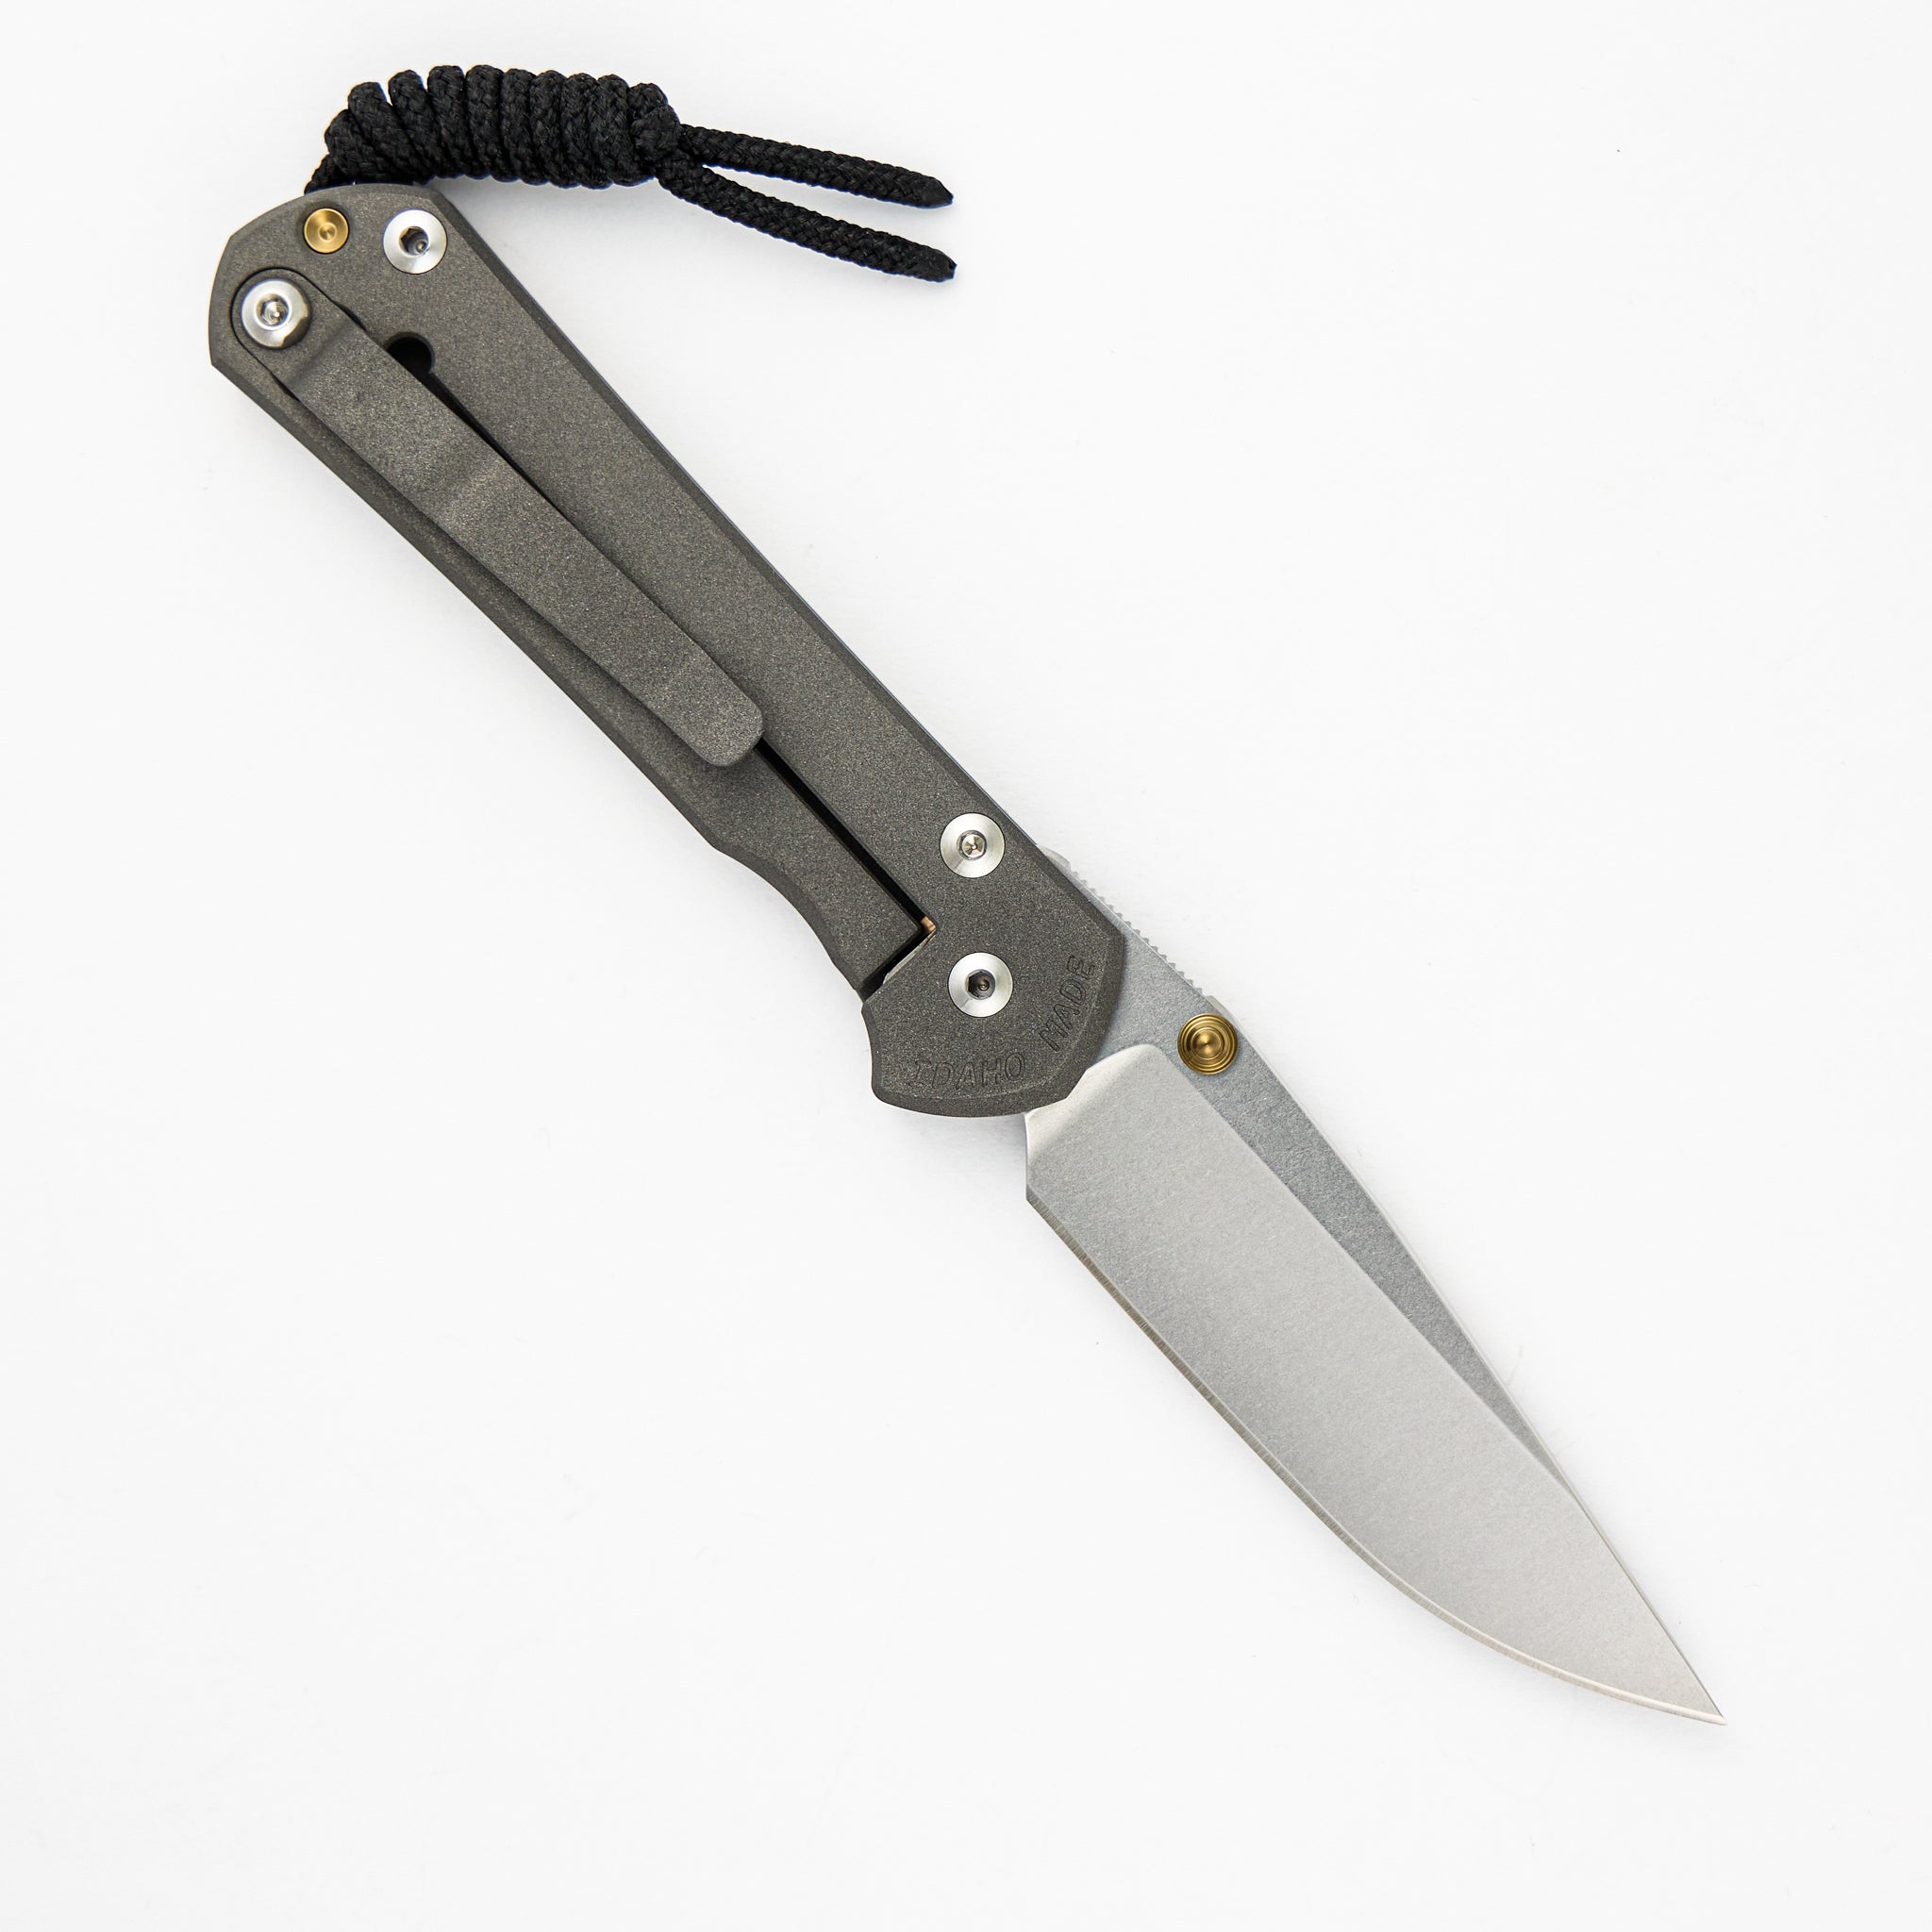 Chris Reeve Small Sebenza 31 - Drop Point CPM MagnaCut Blade - Gold Double Thumb Lugs